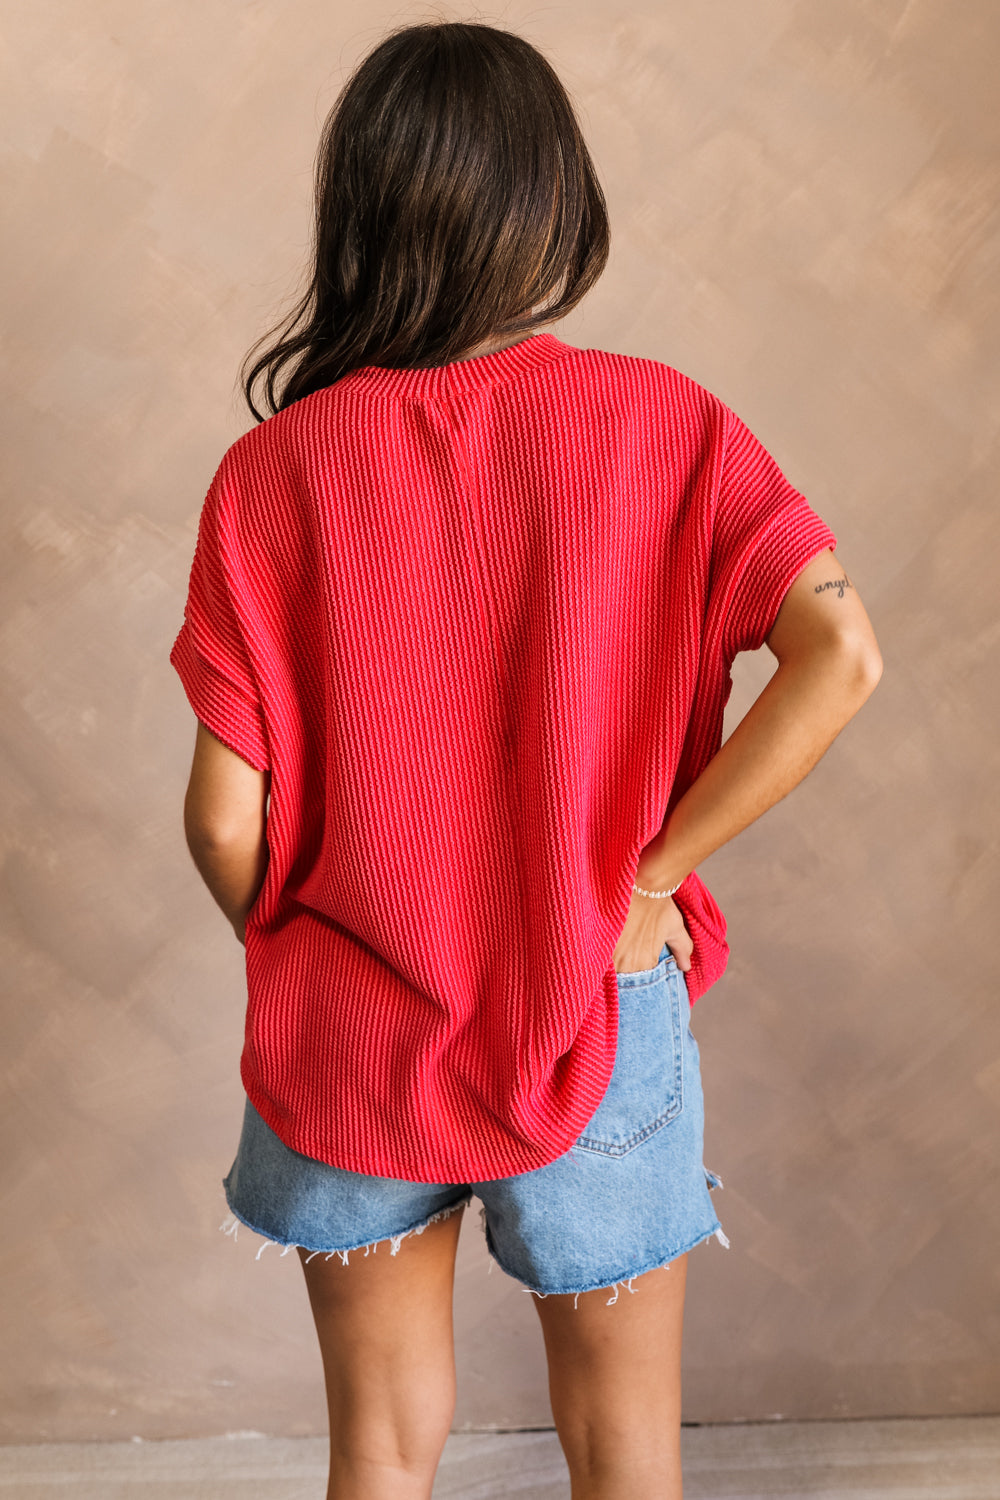 Back view of model wearing the Destiny Ribbed Short Sleeve Top in Red which features Ribbed Fabric, Round Neckline and Short Sleeves.